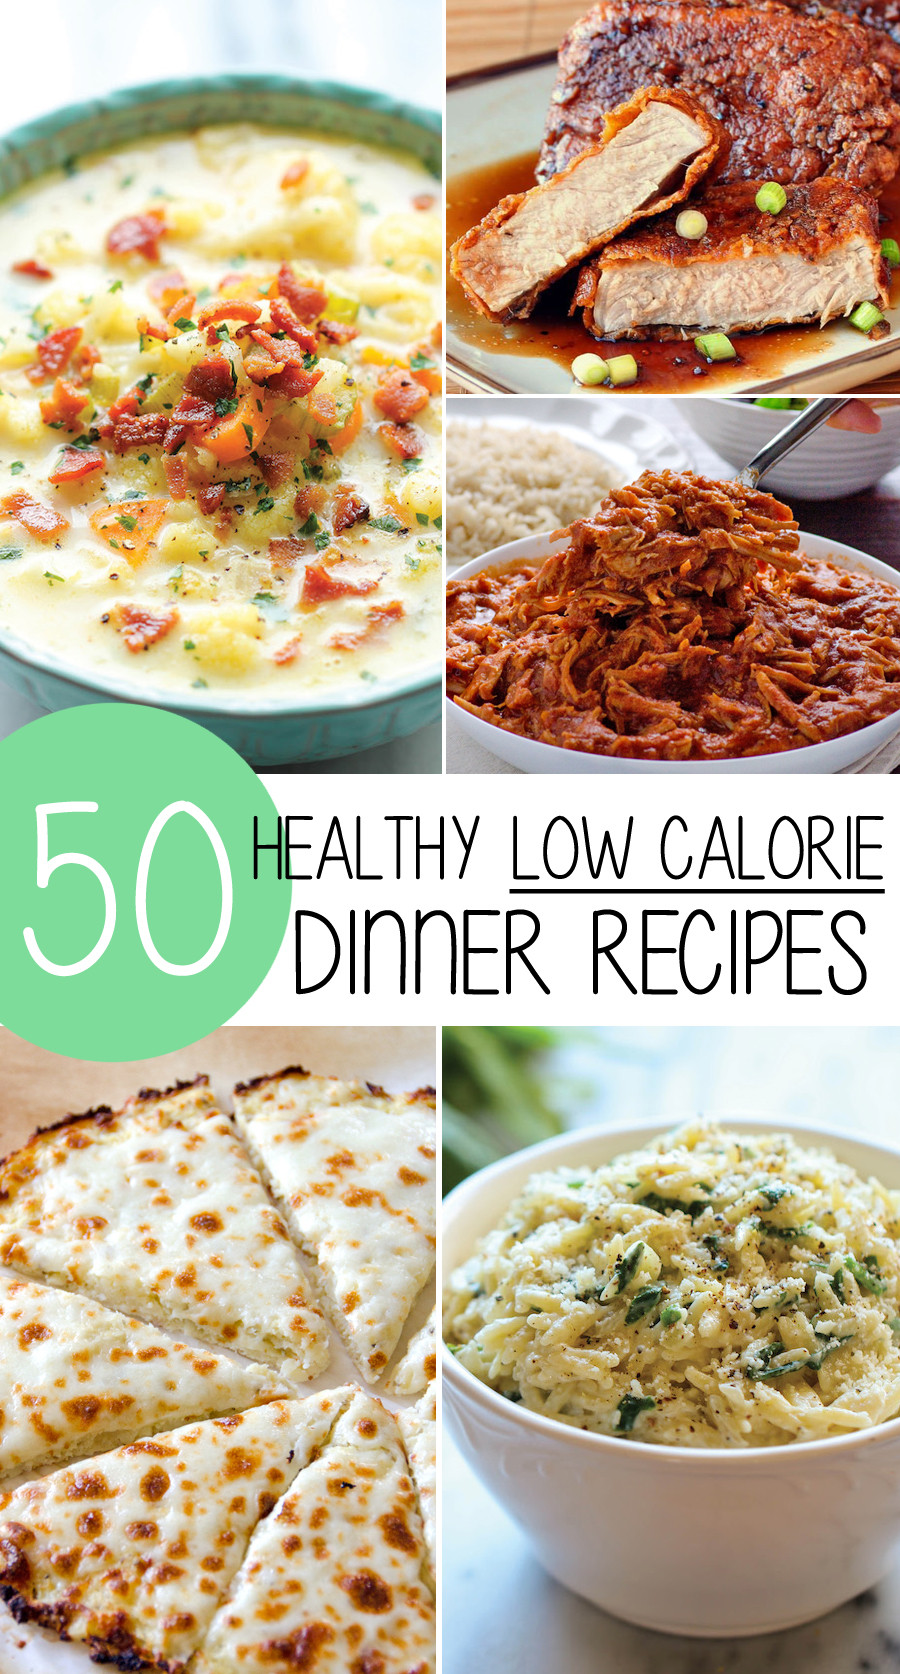 Healthy Dinner Recipes For Weight Loss
 50 Healthy Low Calorie Weight Loss Dinner Recipes